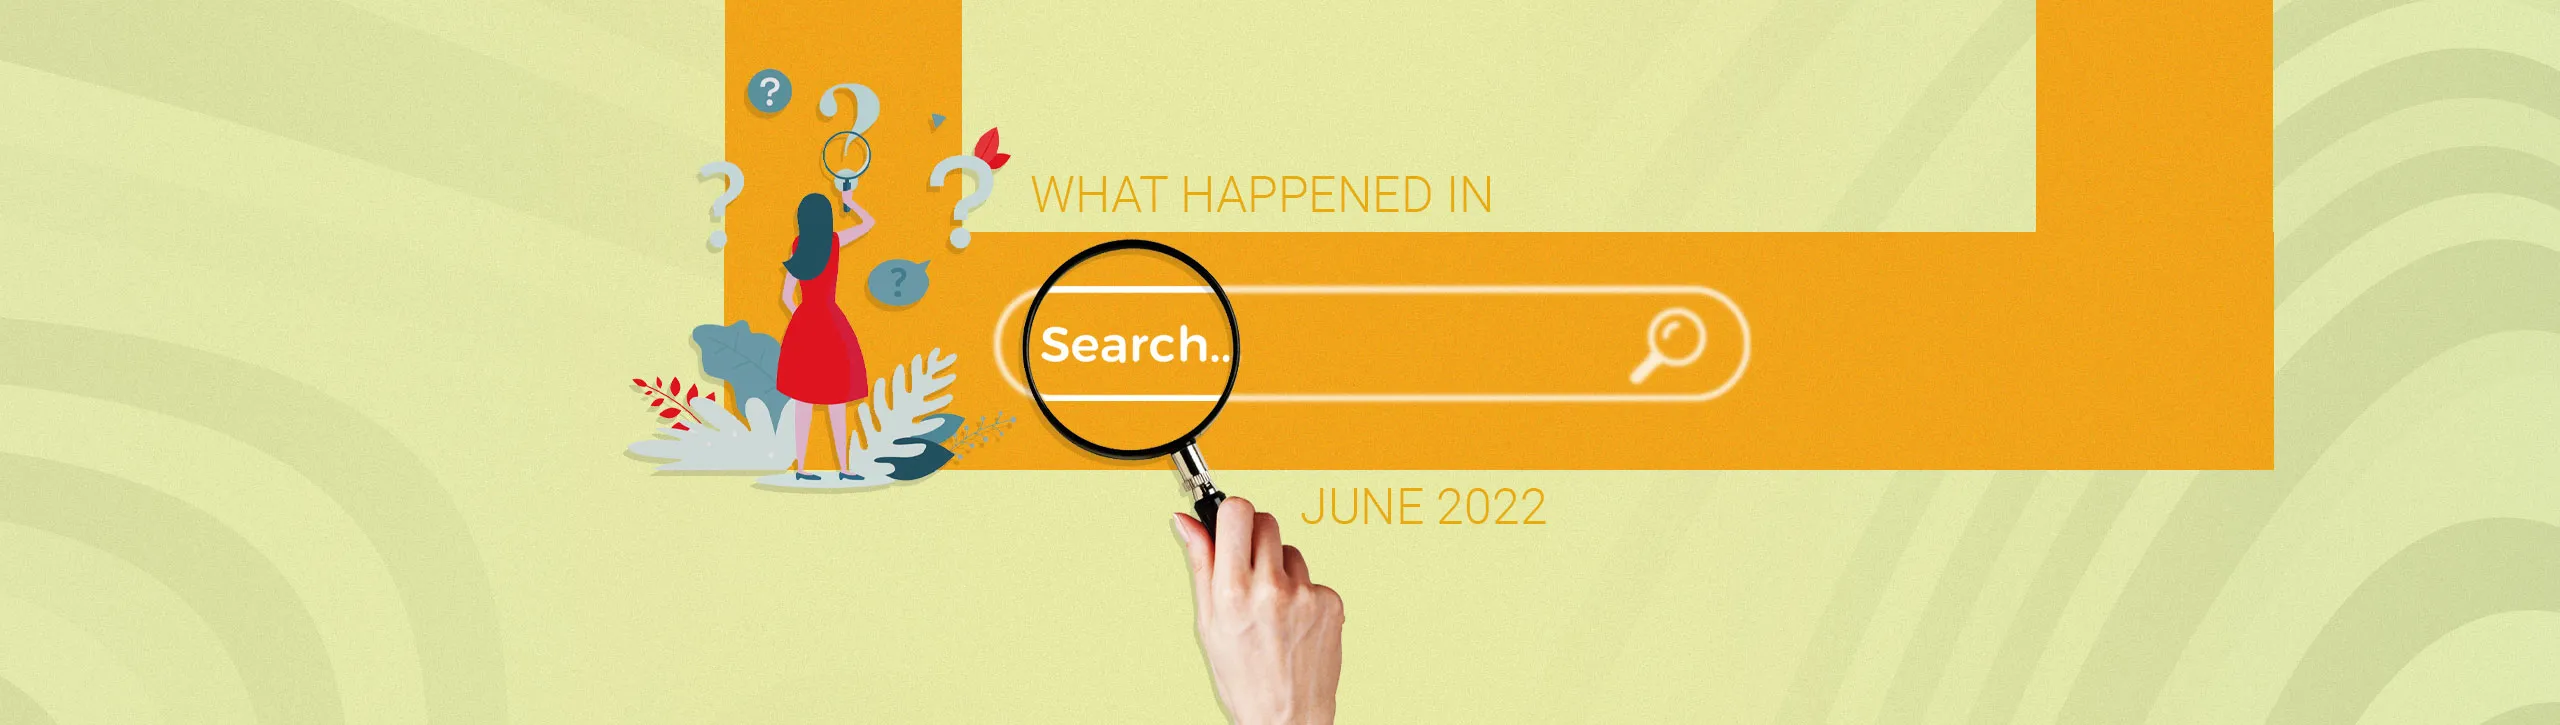 Google Search Updates – June ‘22 Changes  